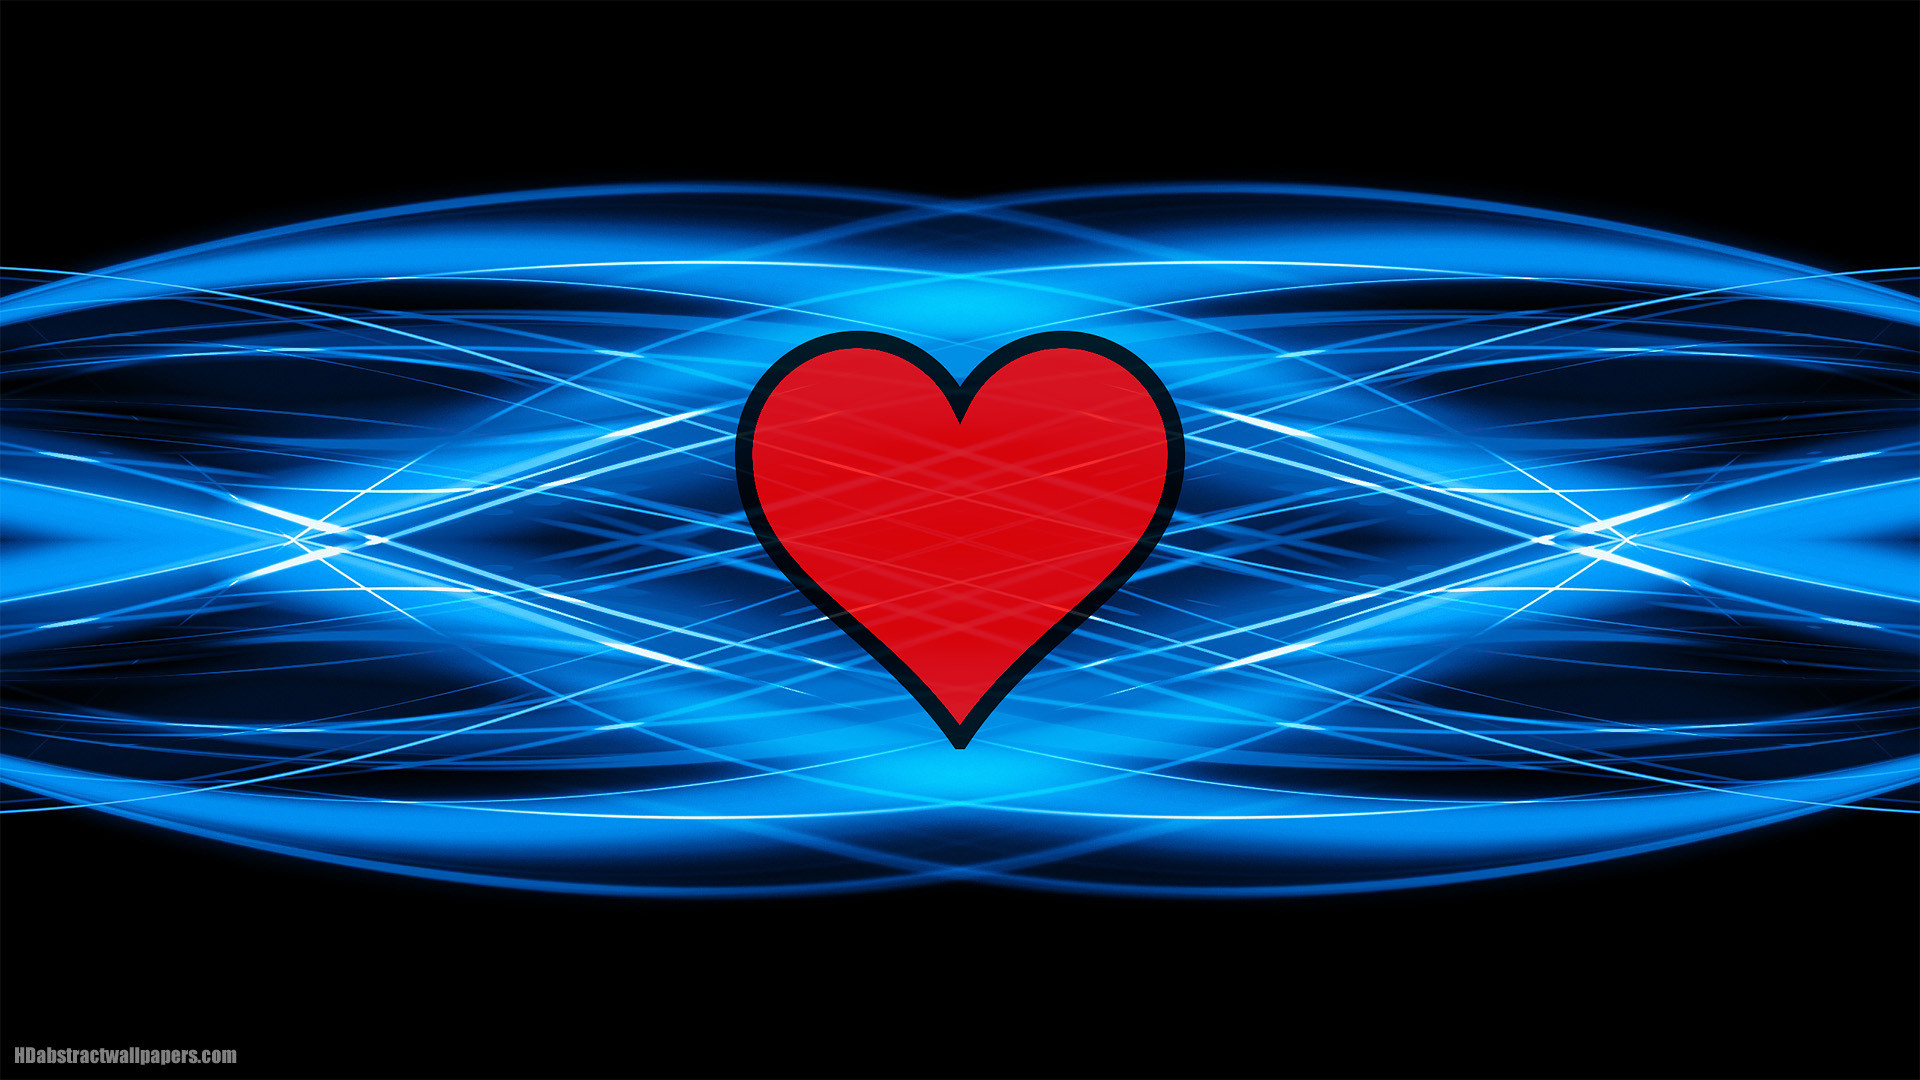 Black blue abstract background with red love heart in the middle, very clean and modern abstract wallpaper. In HD quality resolution 1920×1080